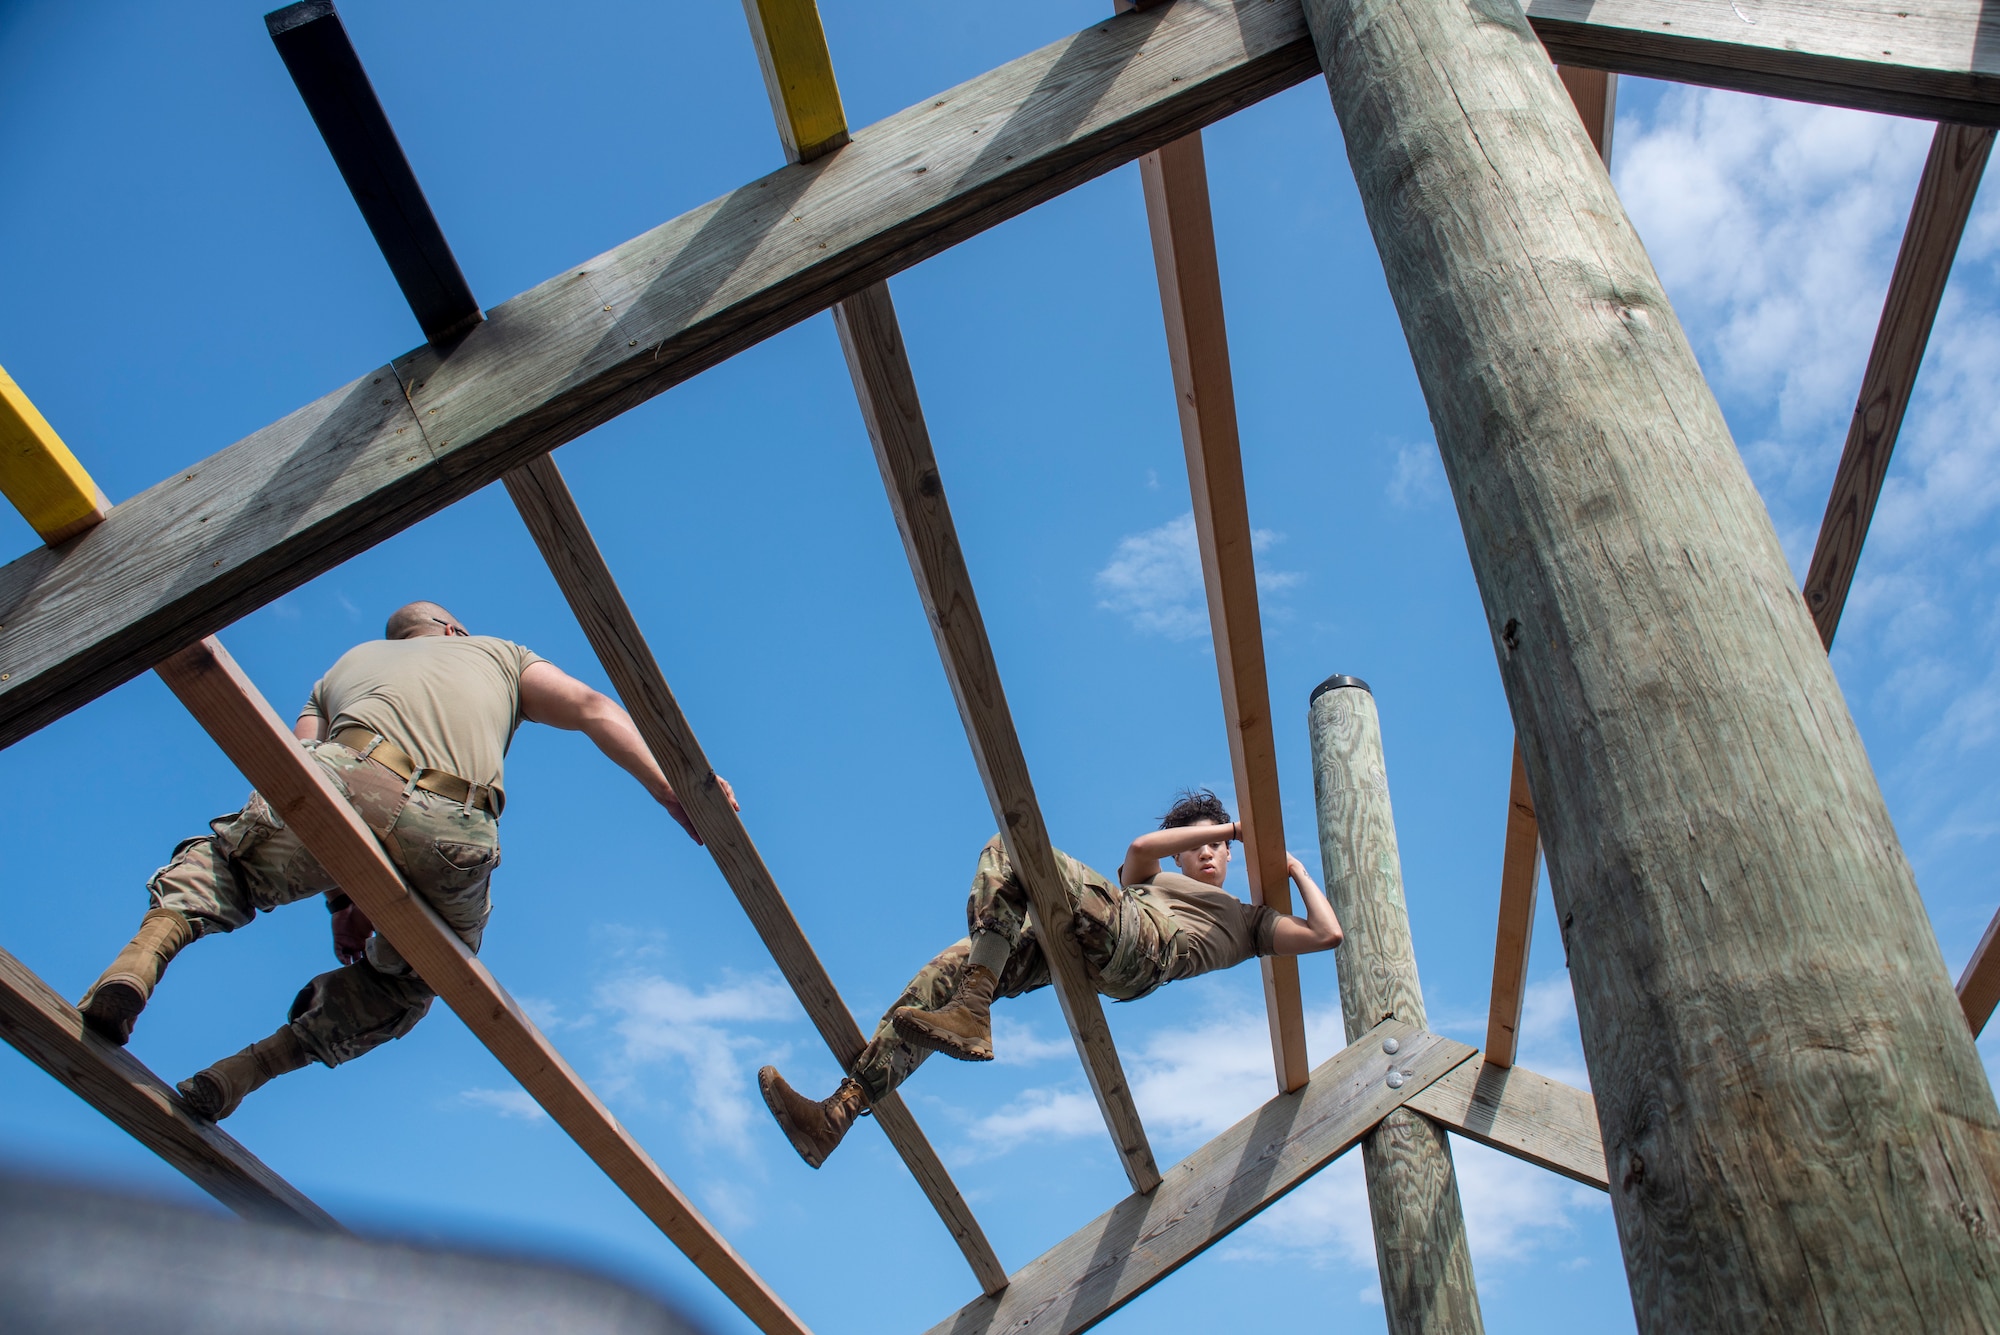 A woman in uniform climbs an obstacle course.